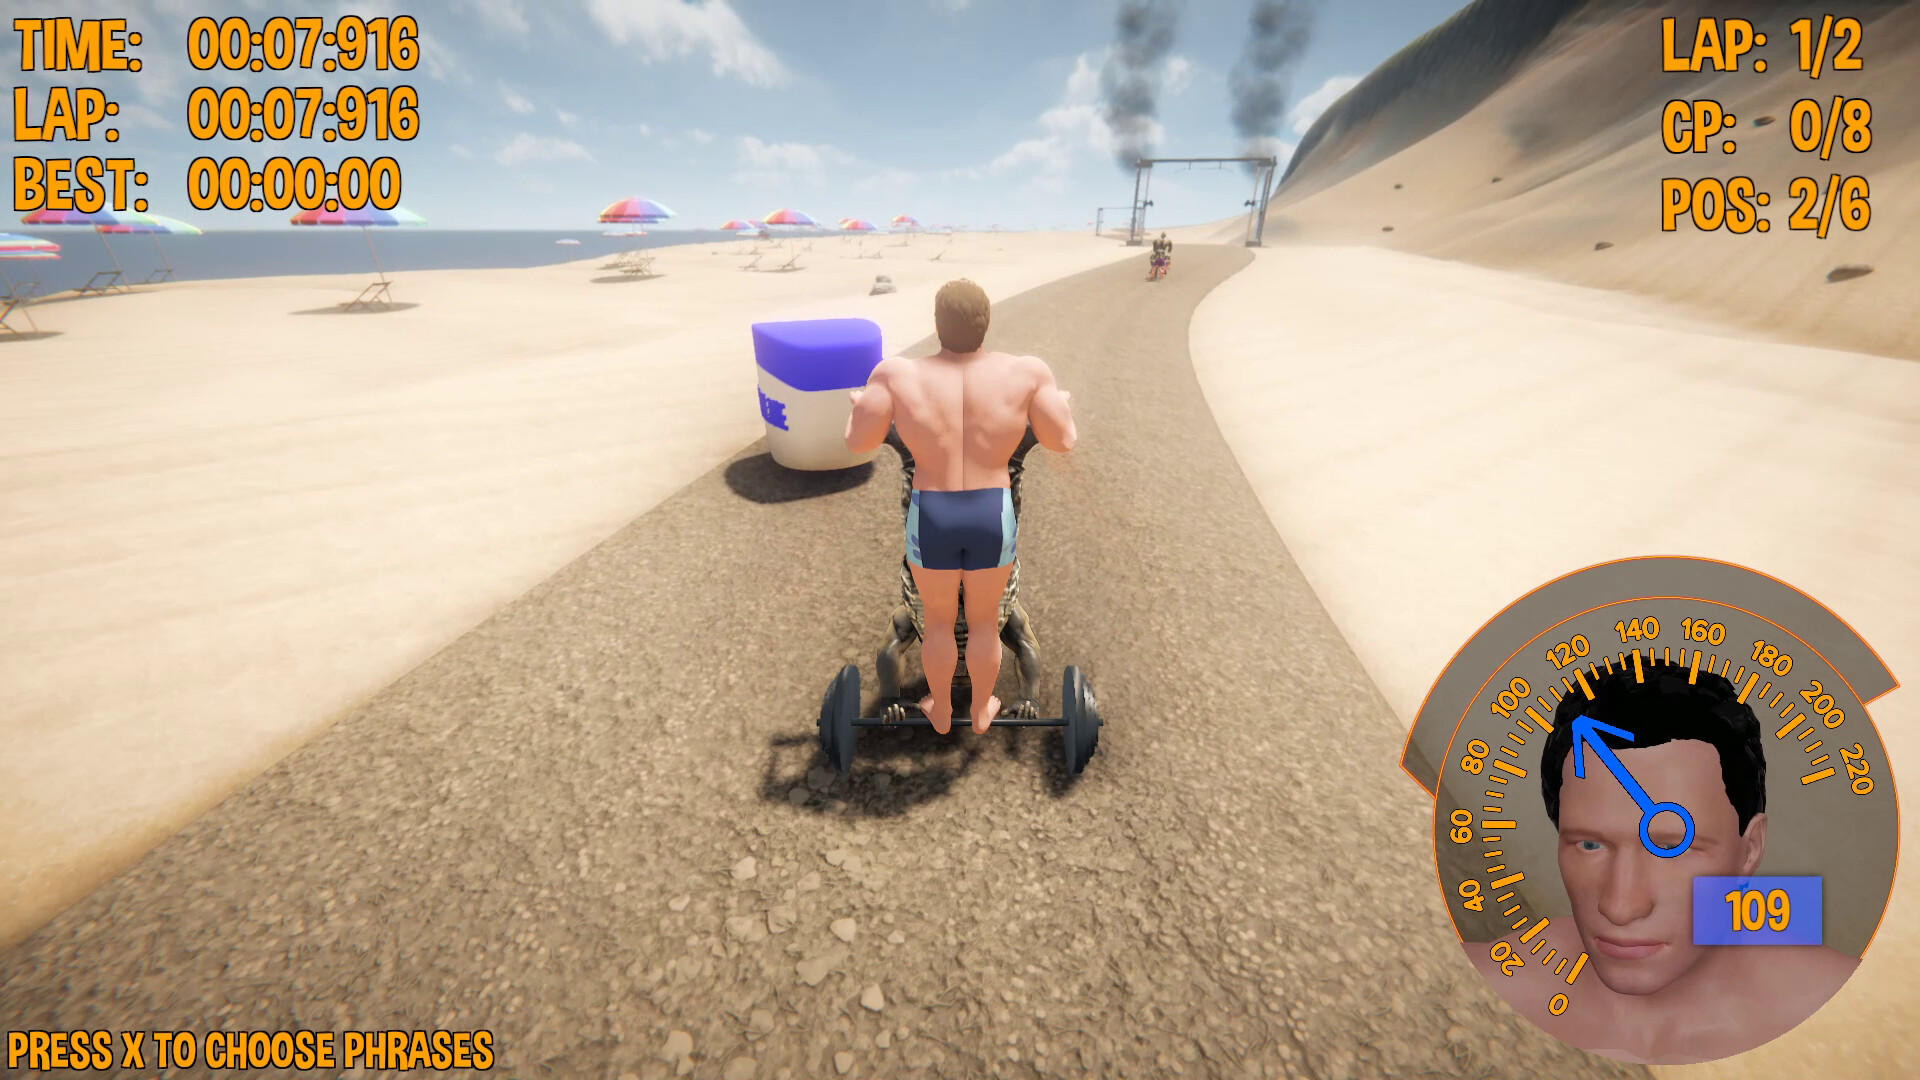 Screenshot 1 of Ultimate Muscle Roller Championship 